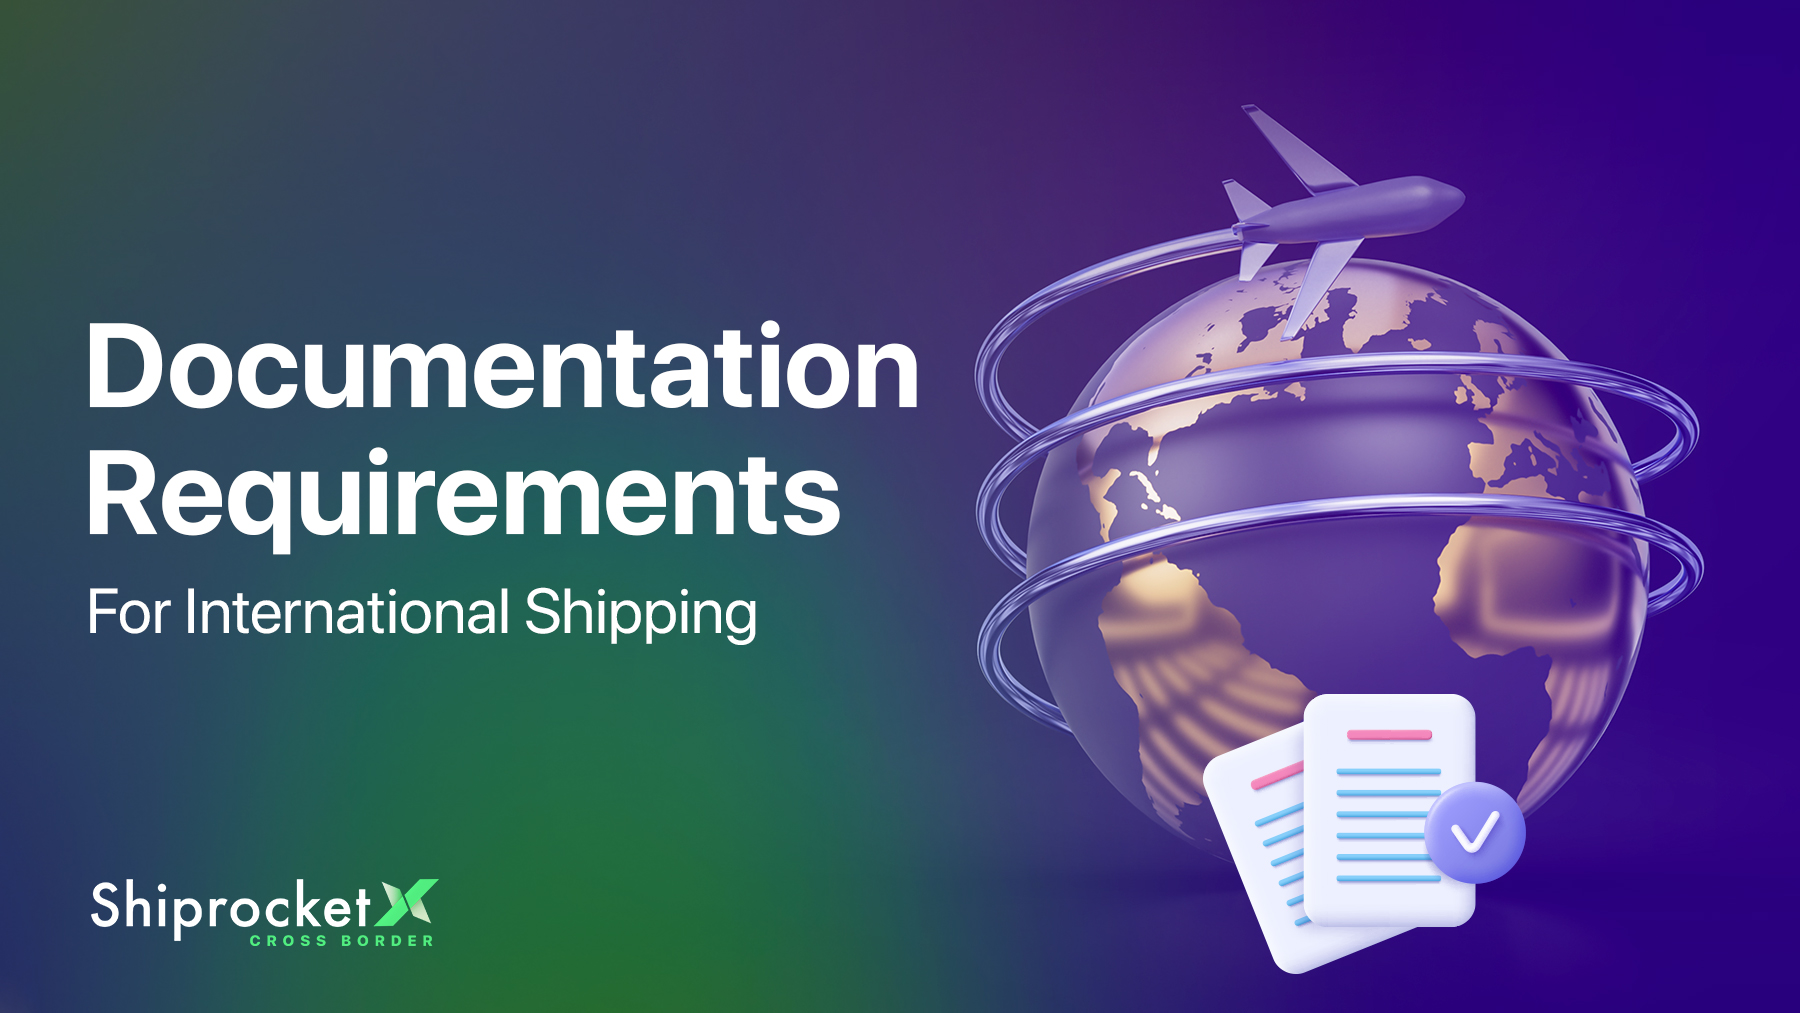 7 Mandatory Documents Required For International Shipping